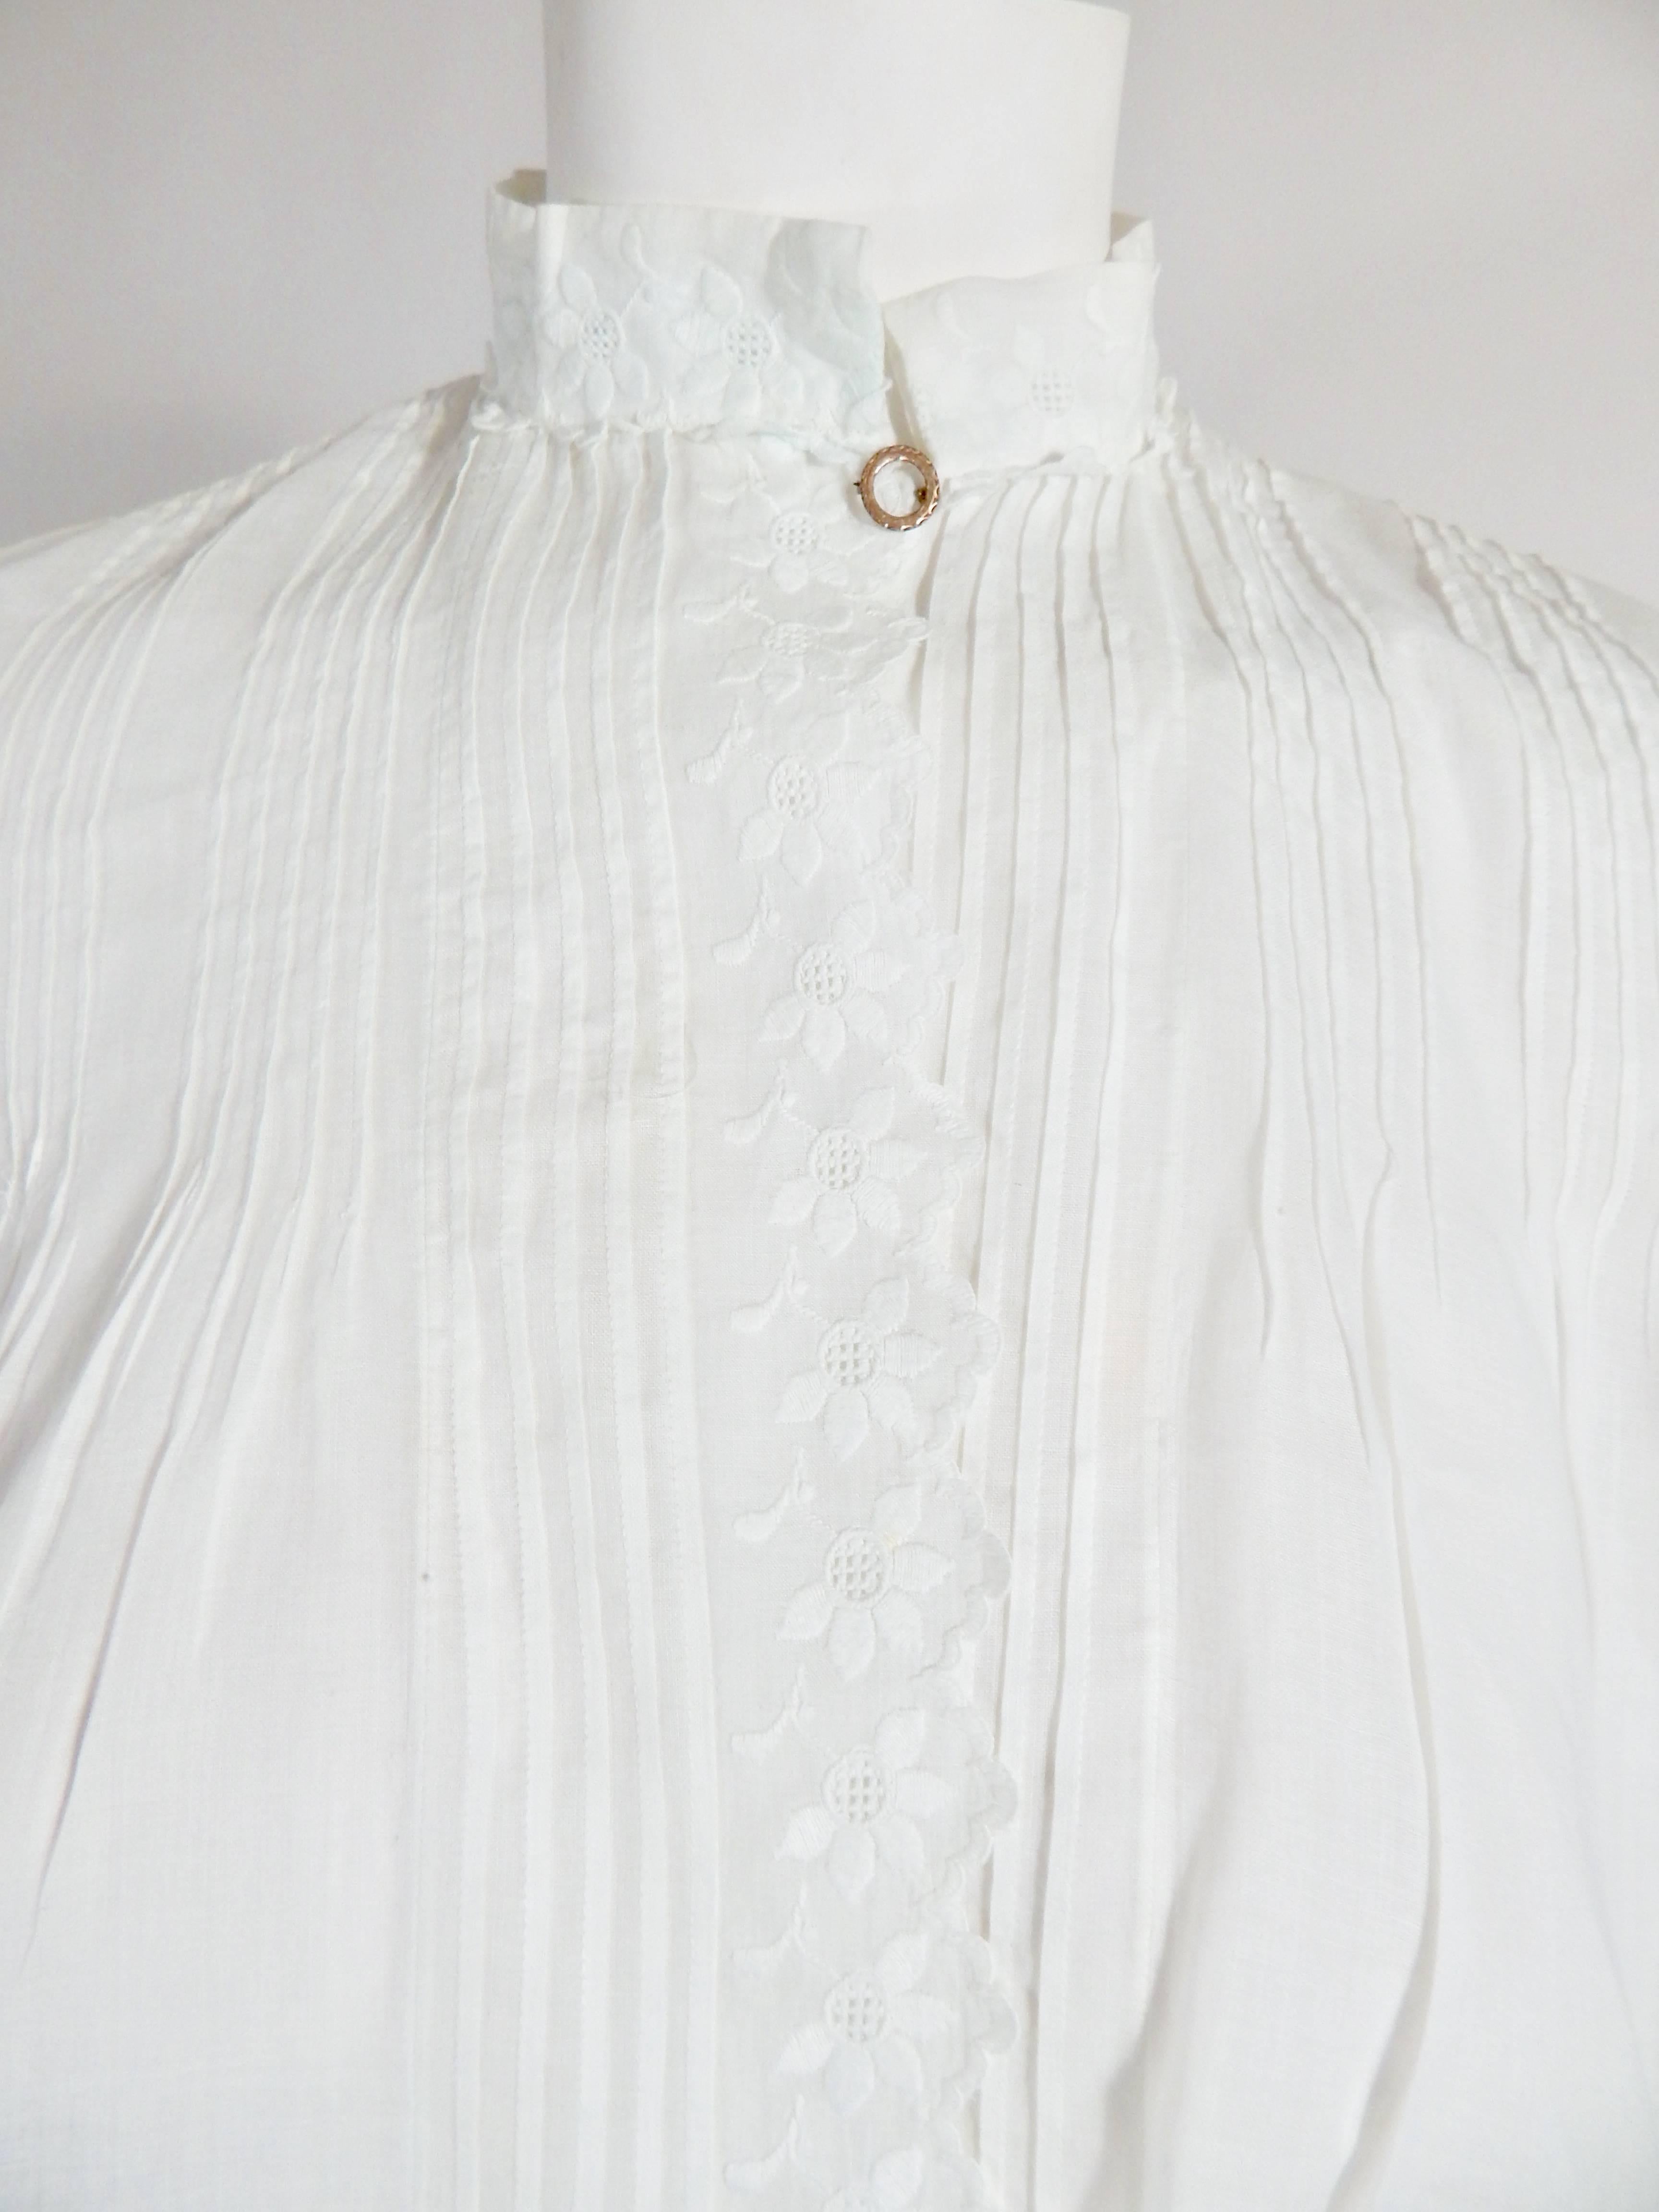 Embroidered Edwardian Blouse In Excellent Condition For Sale In Long Island City, NY